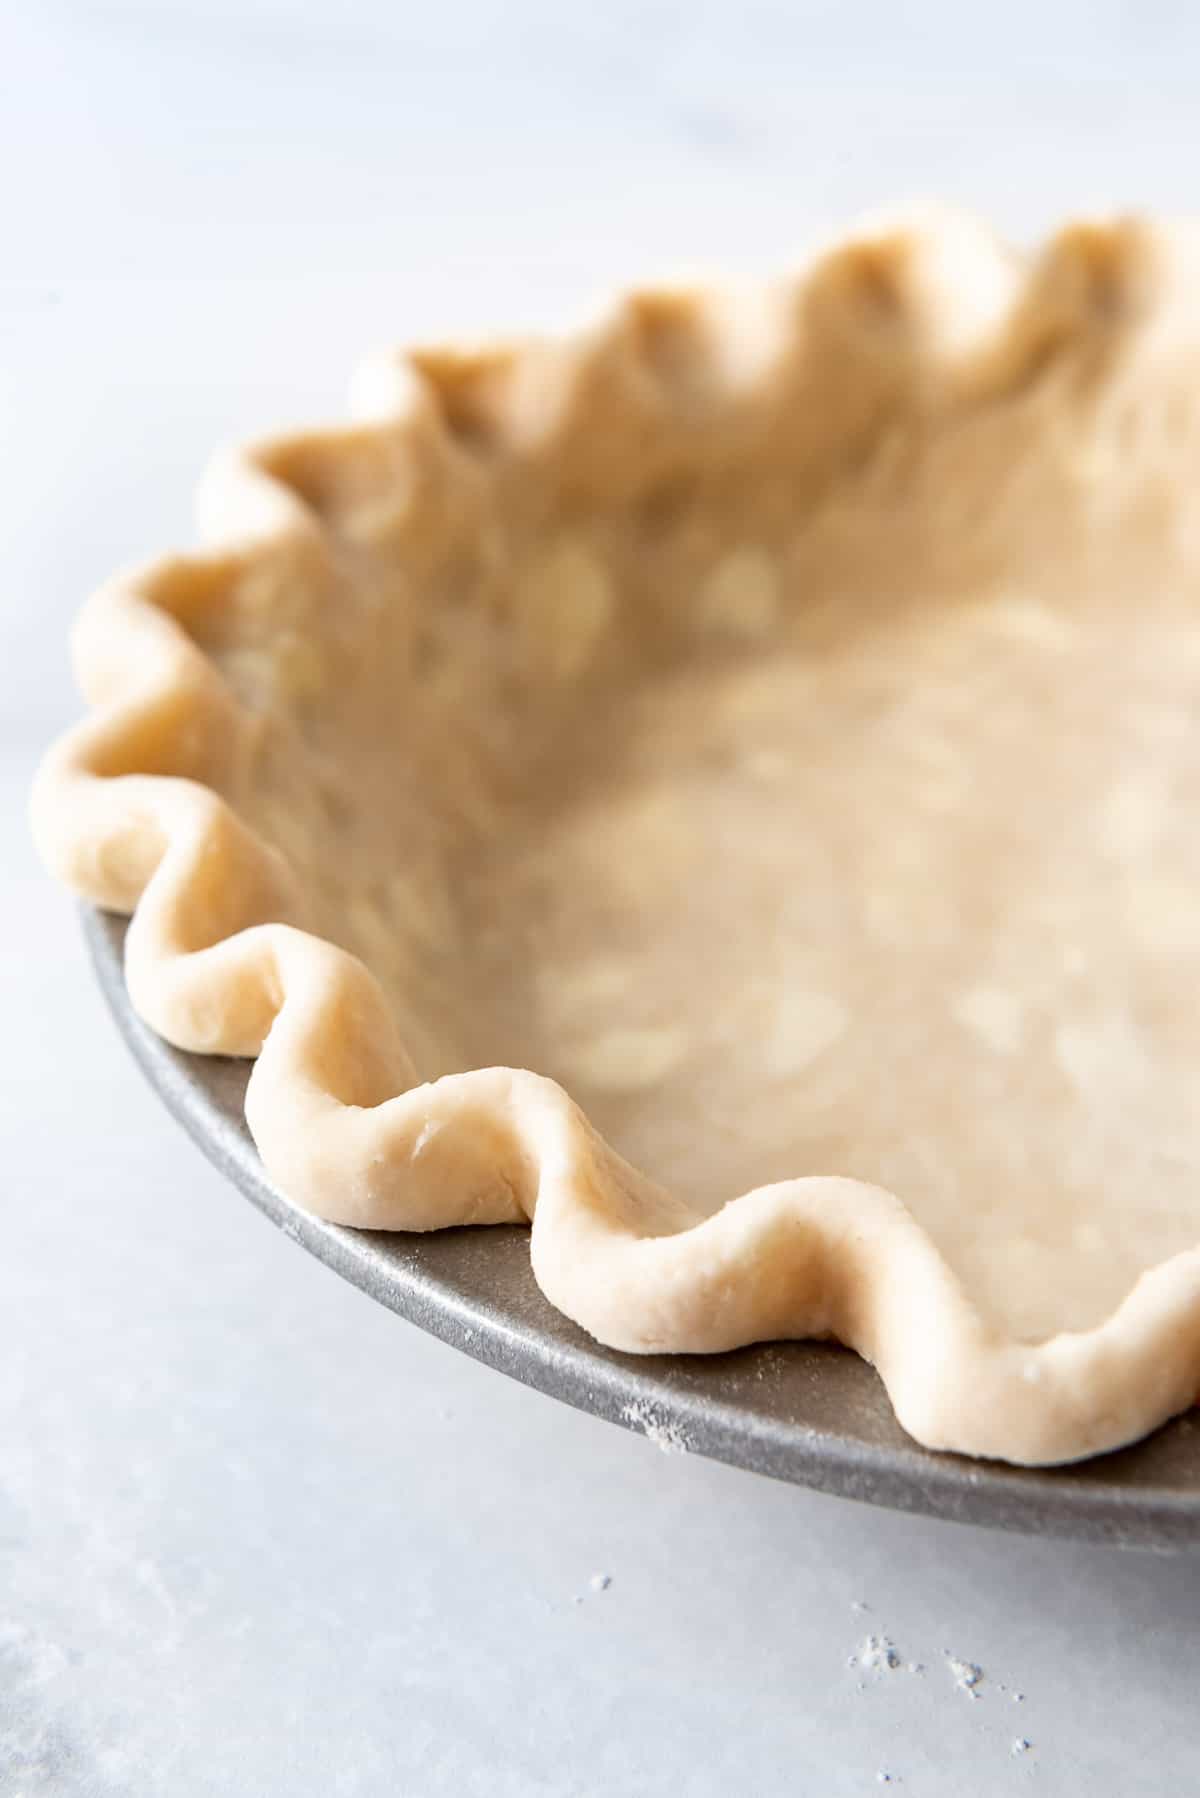 A crimped edge of an unbaked pie crust.